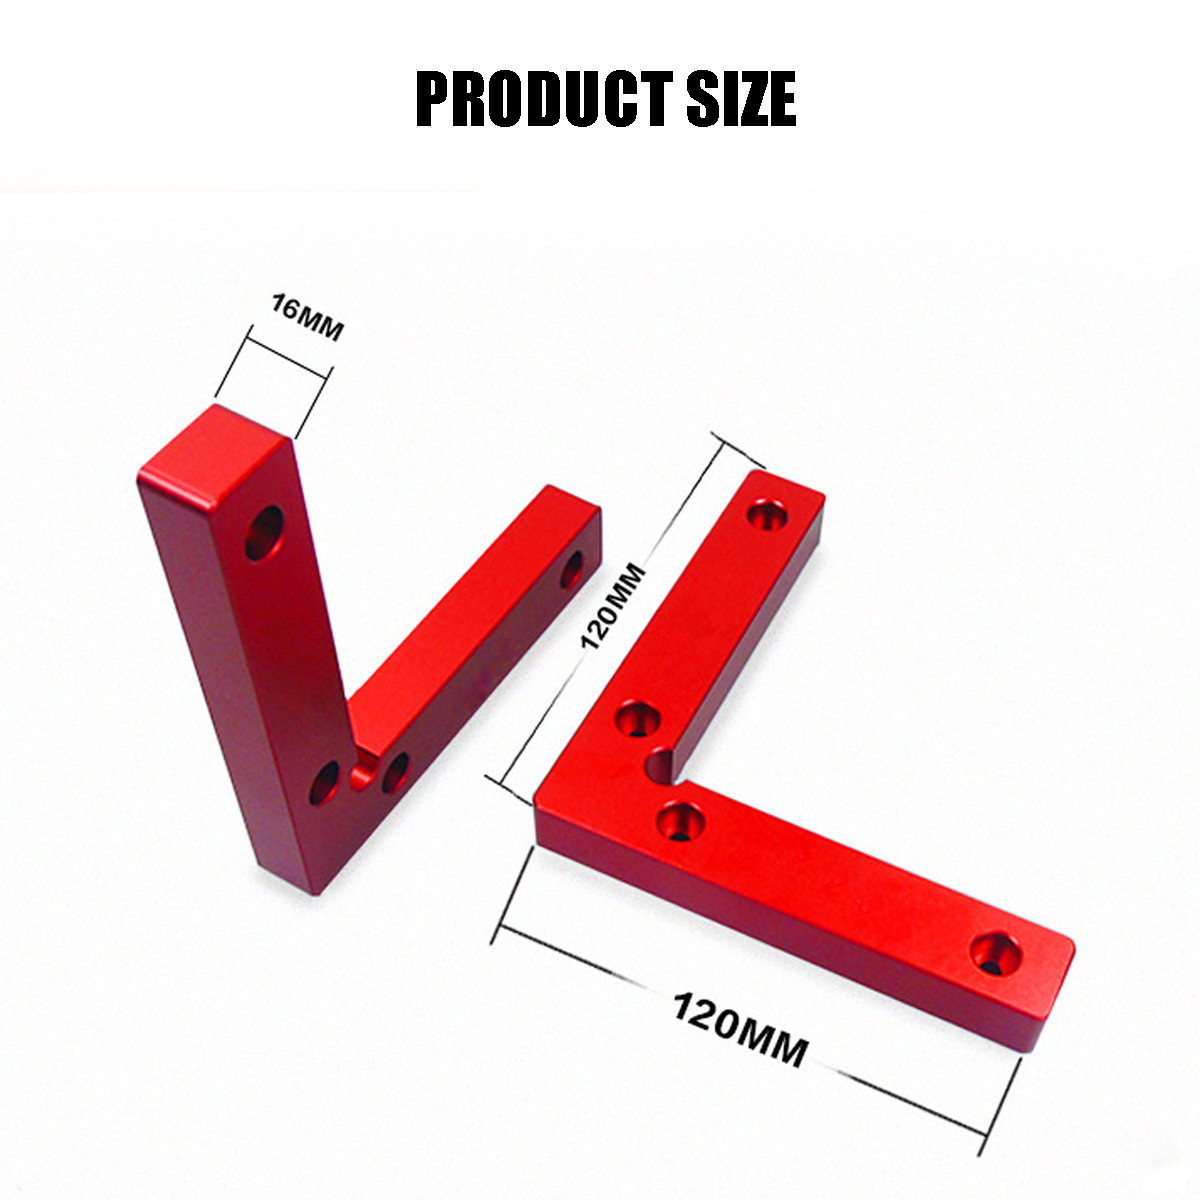 L-Shape-Clamp-90-Degree-Square-Right-Angle-Corner-Wood-Metal-Welding-Multifunctional-Tools-1543730-10